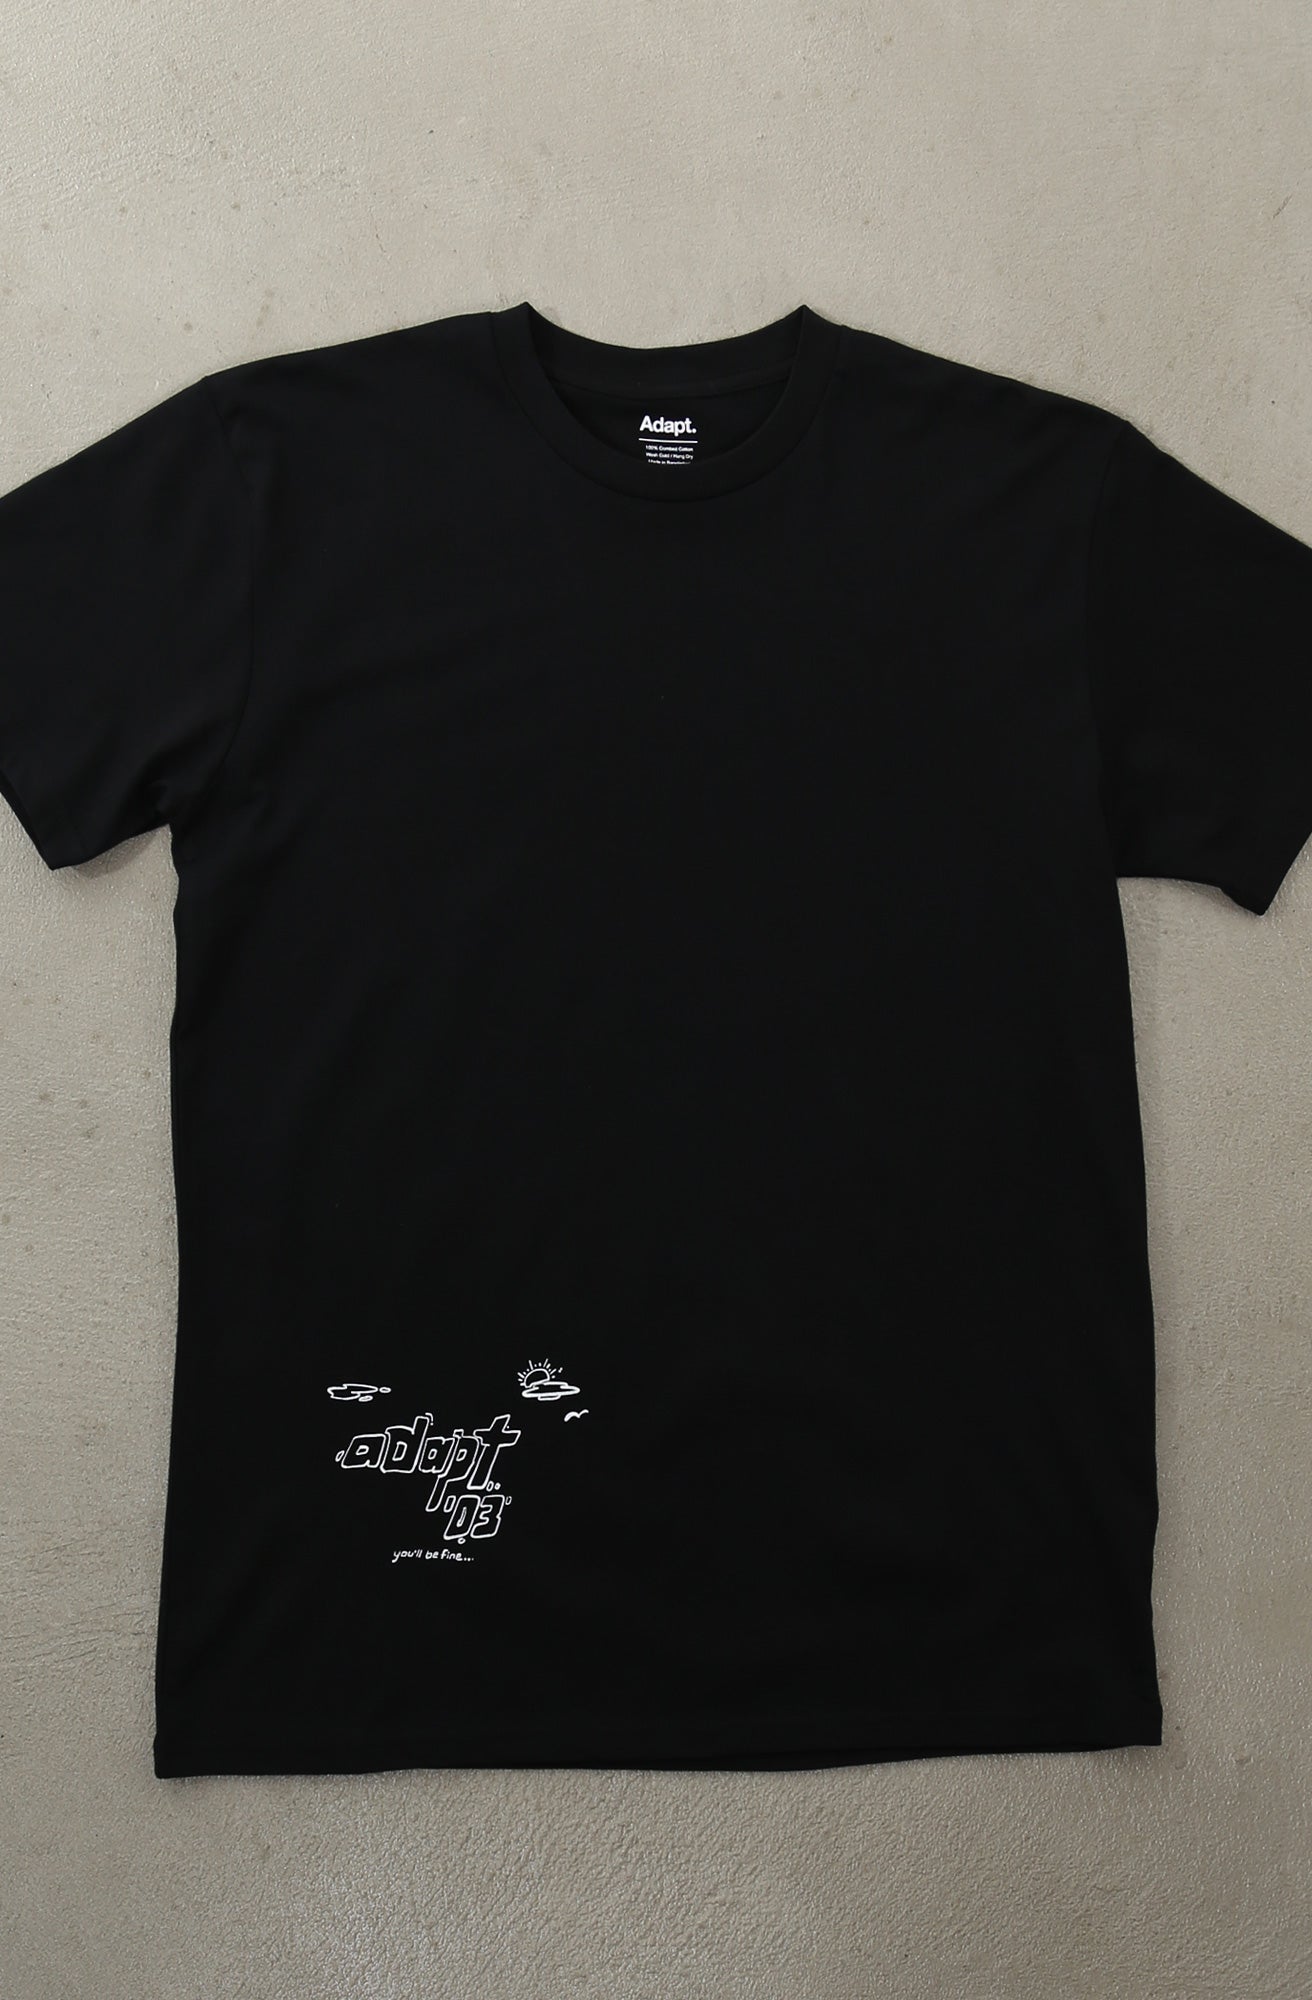 By Your Side (Men's Black A1 Tee)